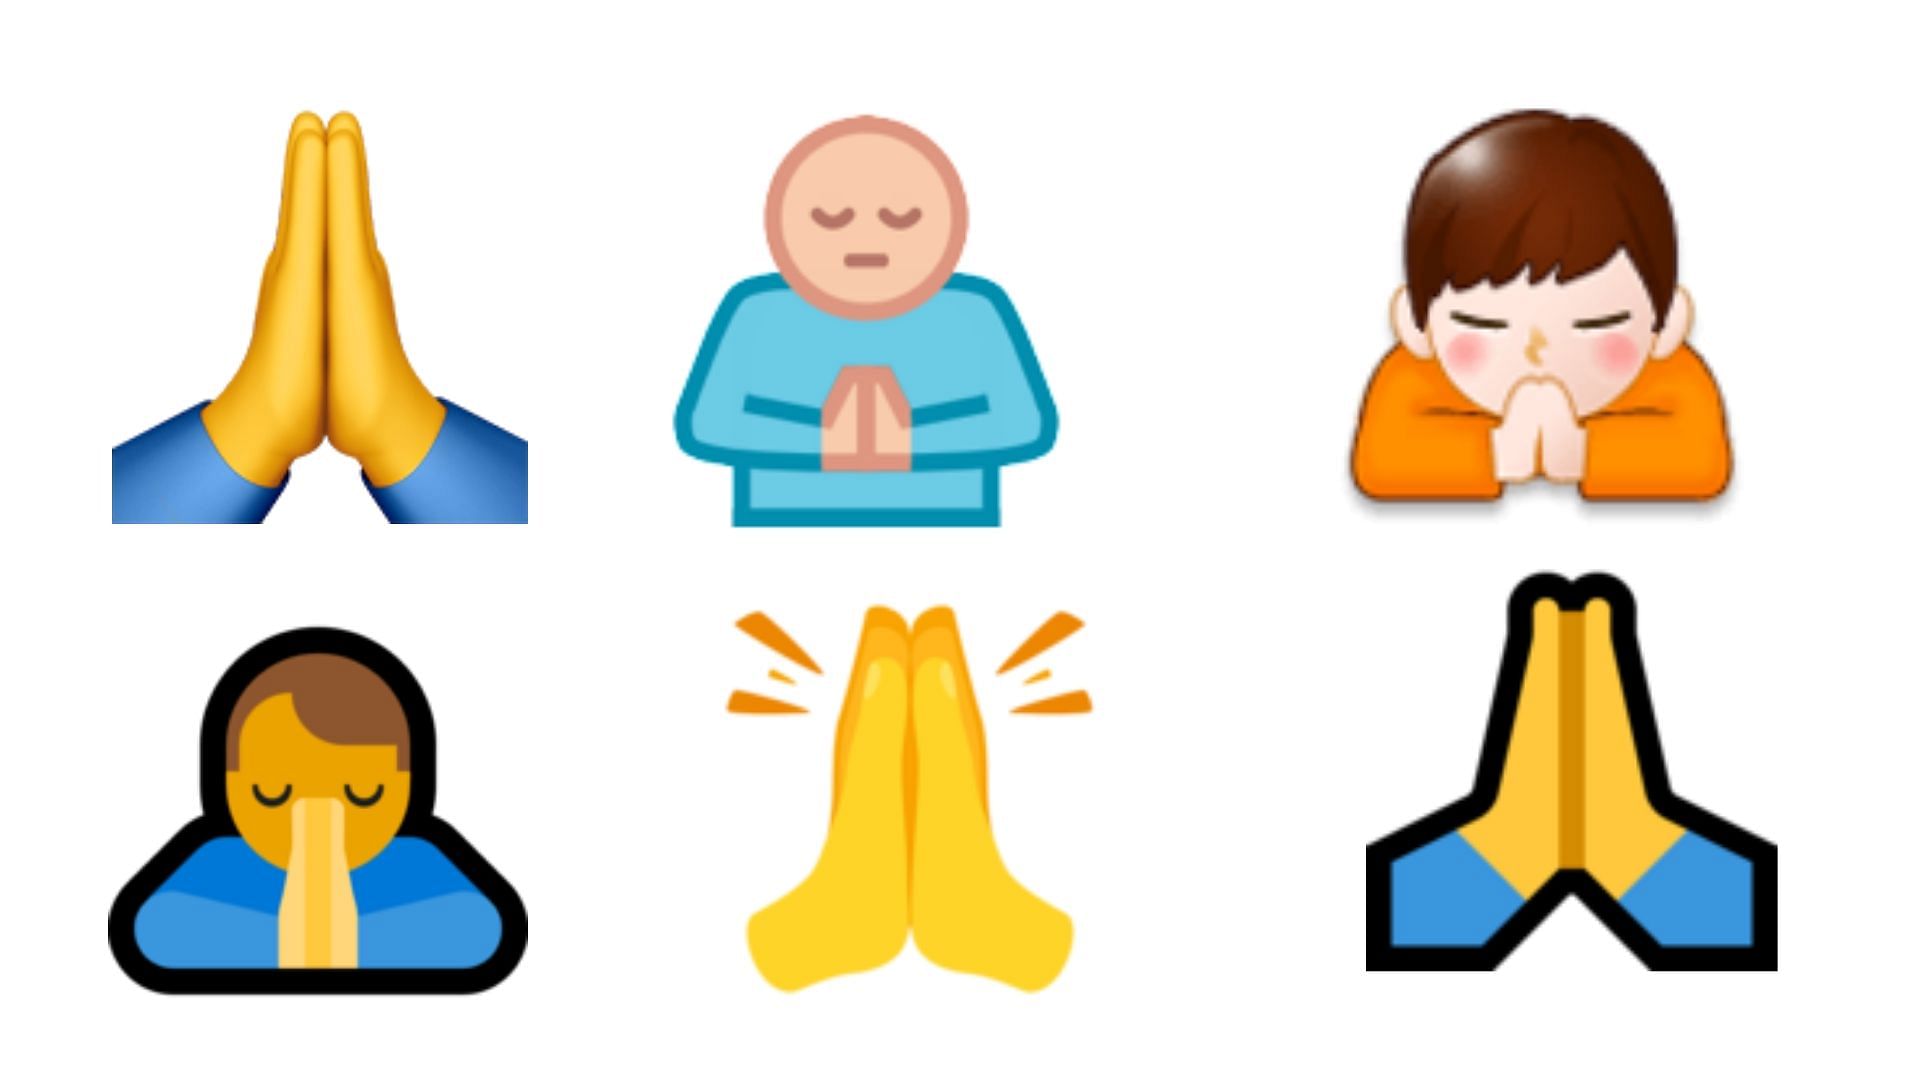 Happy World Emoji Day 2020: Emojis are now constantly evolving.